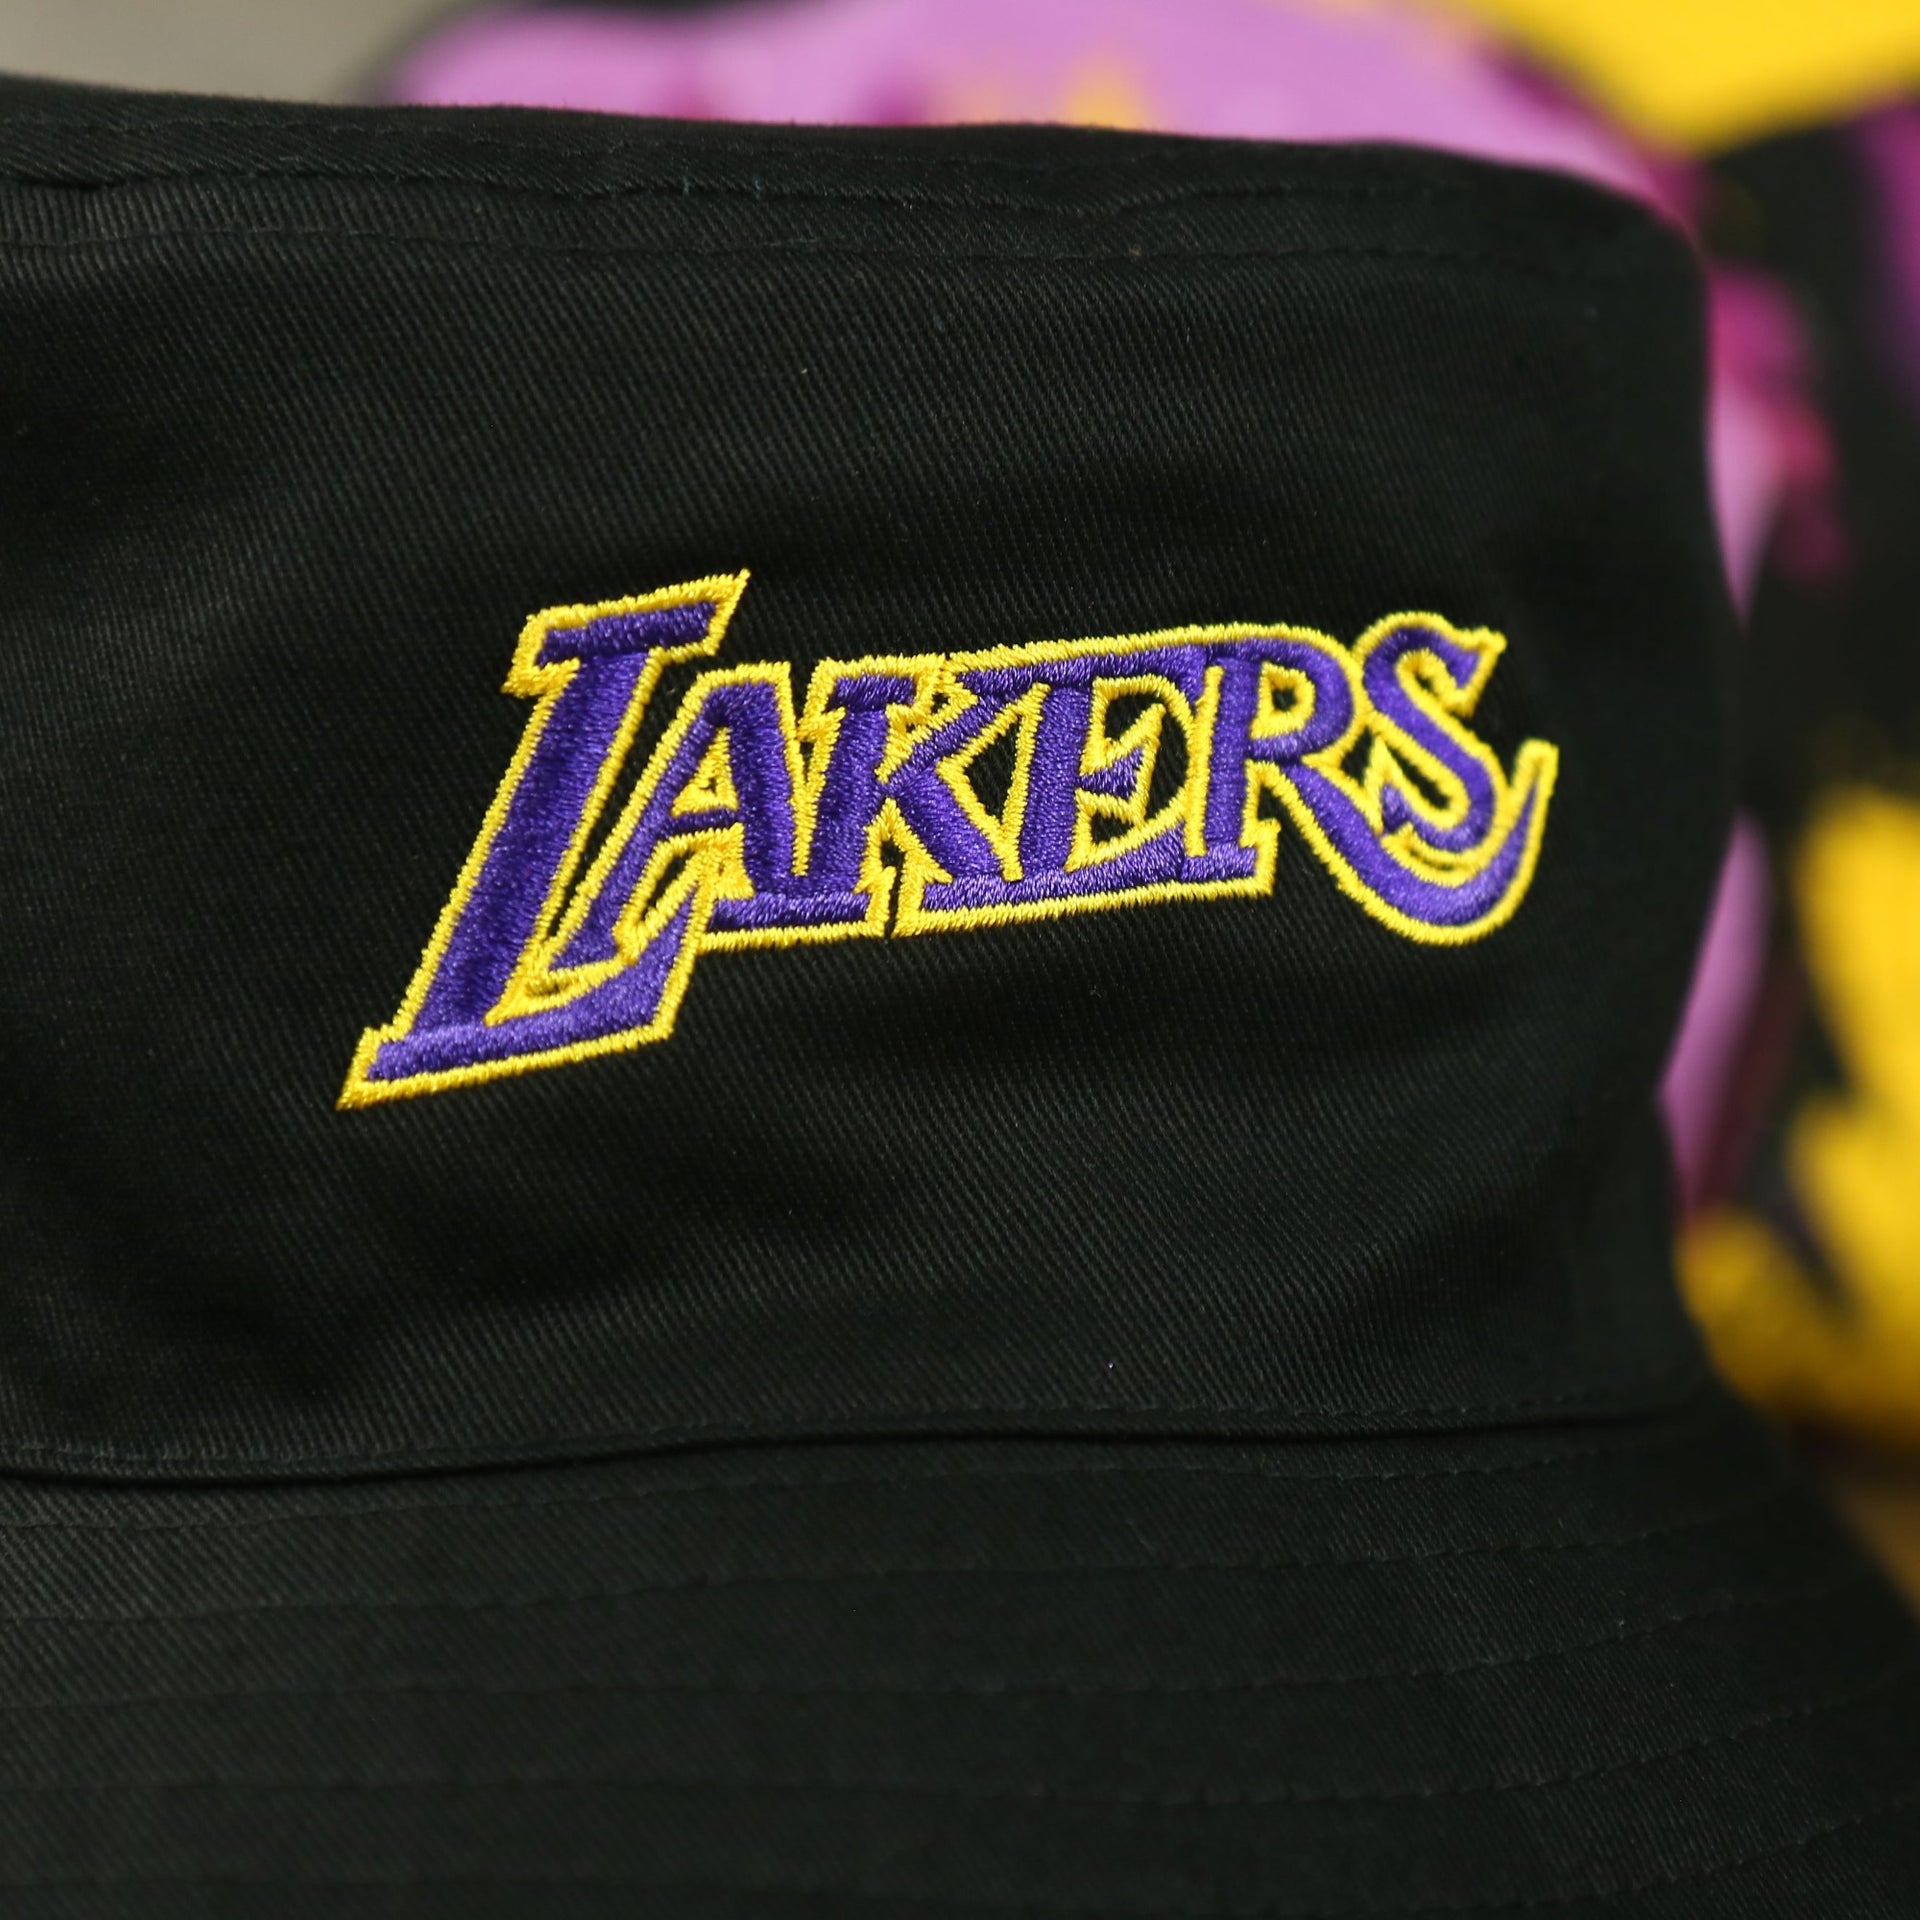 lakers logo on the Los Angeles Lakers 90s Inspired NBA Hyper Mitchell and Ness Reversible Bucket Hat